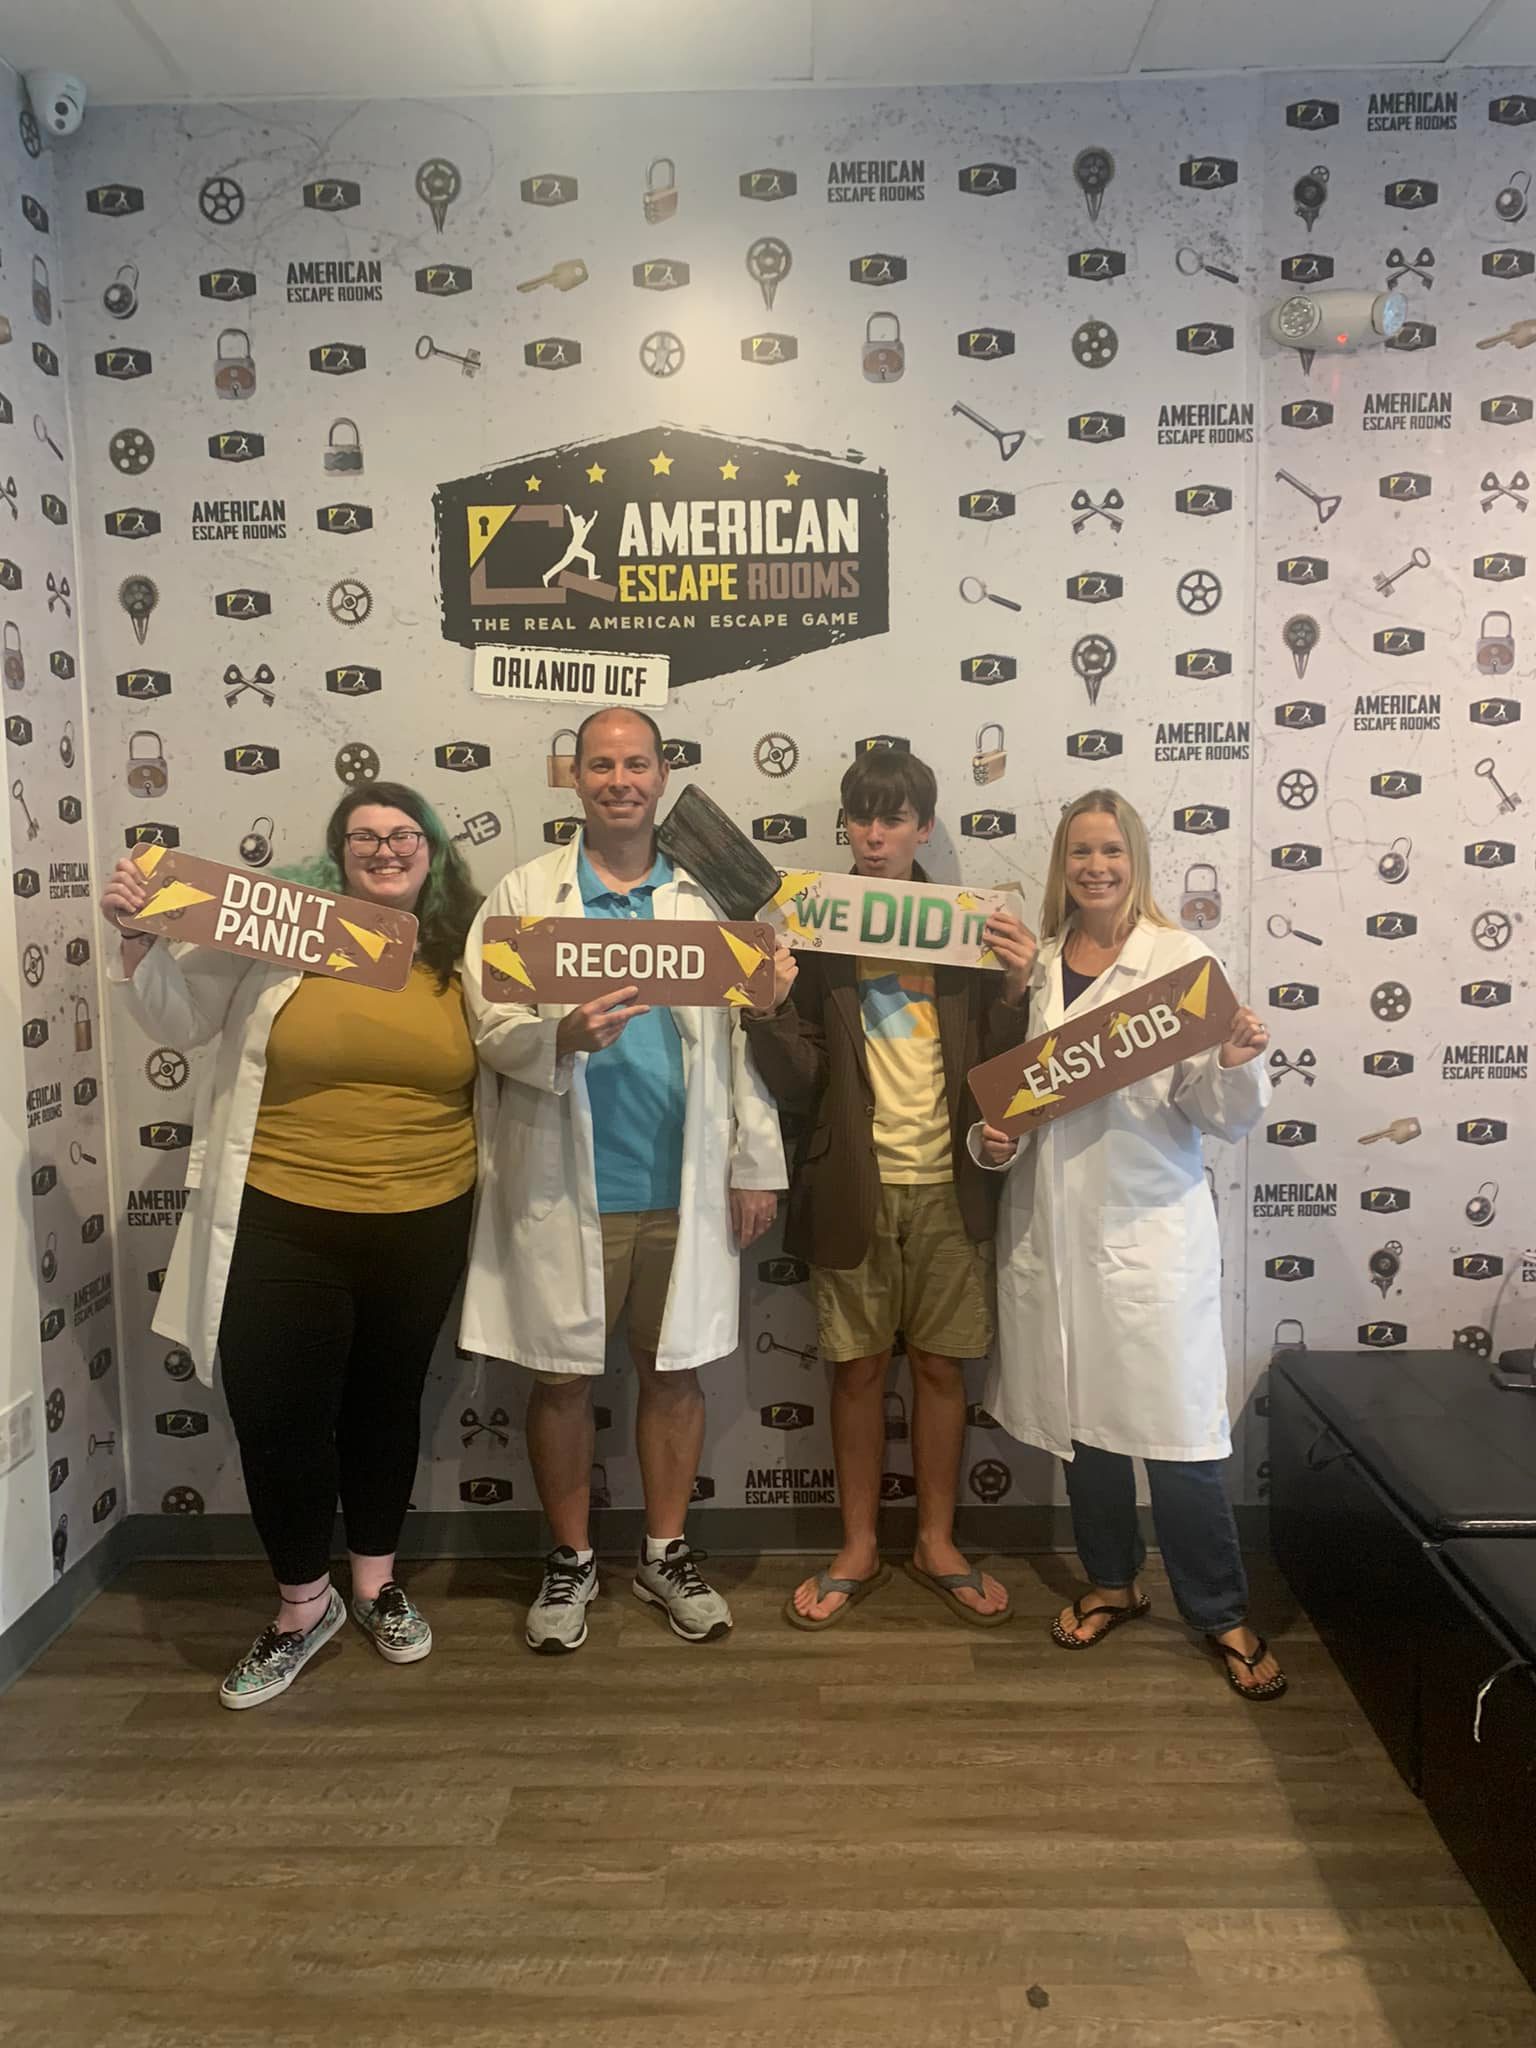 Team Dada played the Mad Professor's Asylum - Orlando and finished the game with 18 minutes 16 seconds left. Congratulations! Well done!